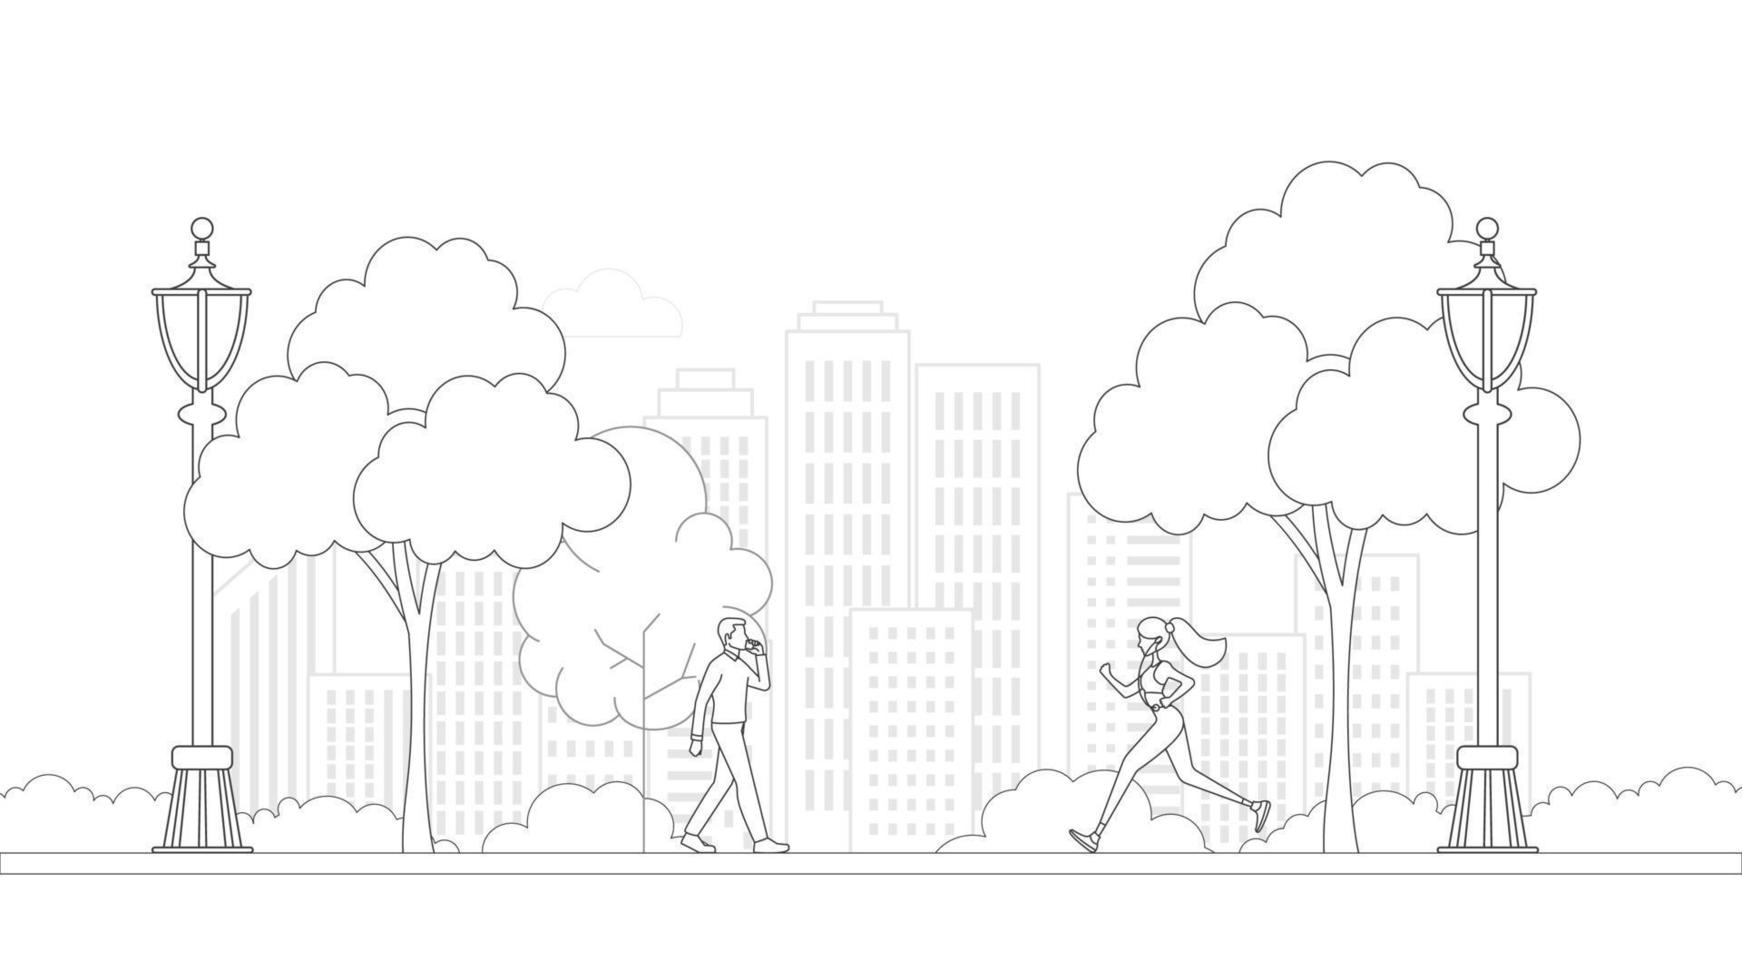 People, city skyline in line art style - landscape with houses, trees and clouds. Isolated vector illustration of beautiful cityscape for real estate and property banner or card